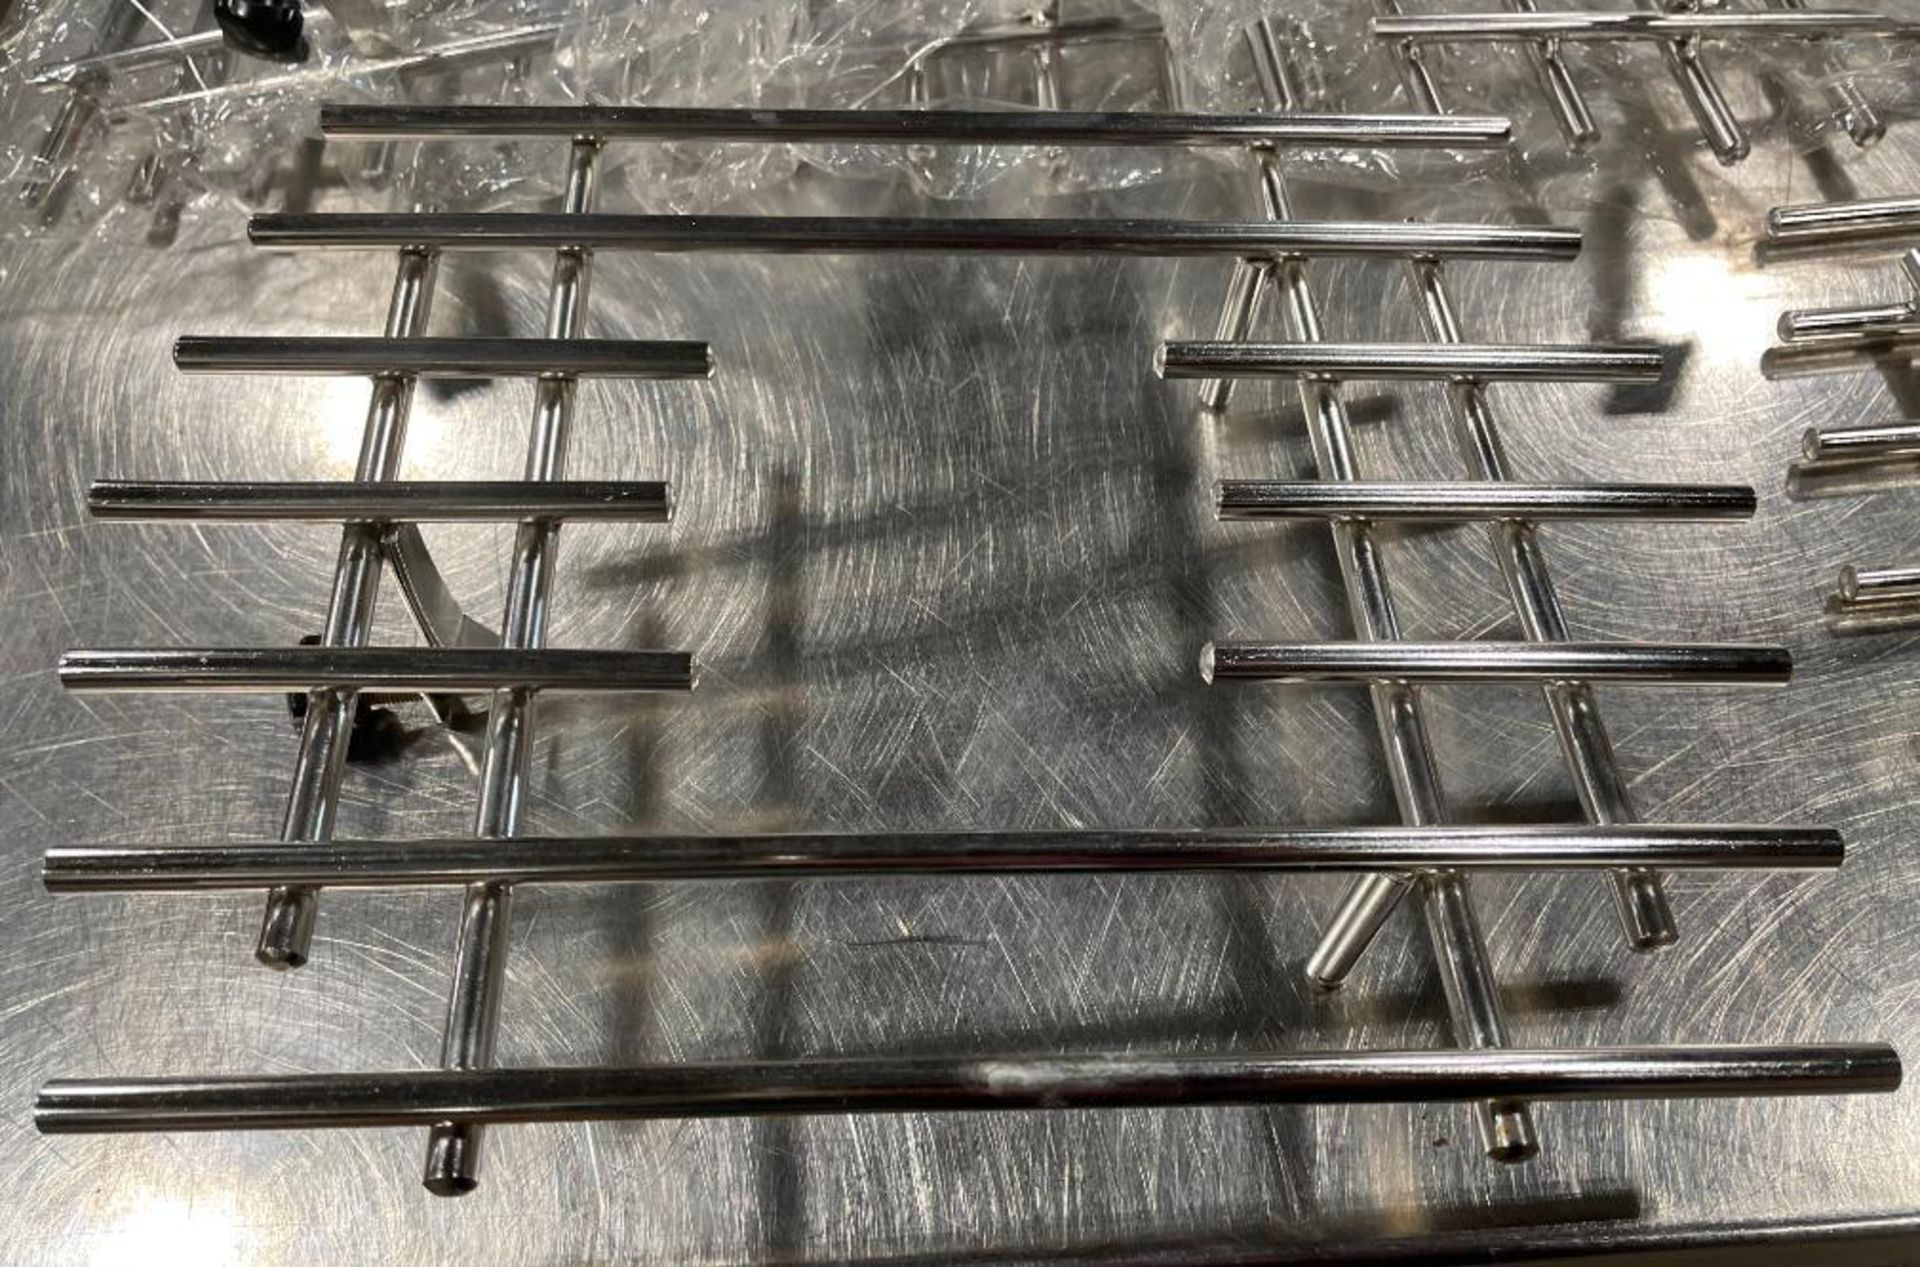 JOHNSON ROSE STAINLESS STEEL GRATES FOR 4860 COPPER RECHAUD 4860G - Image 2 of 4